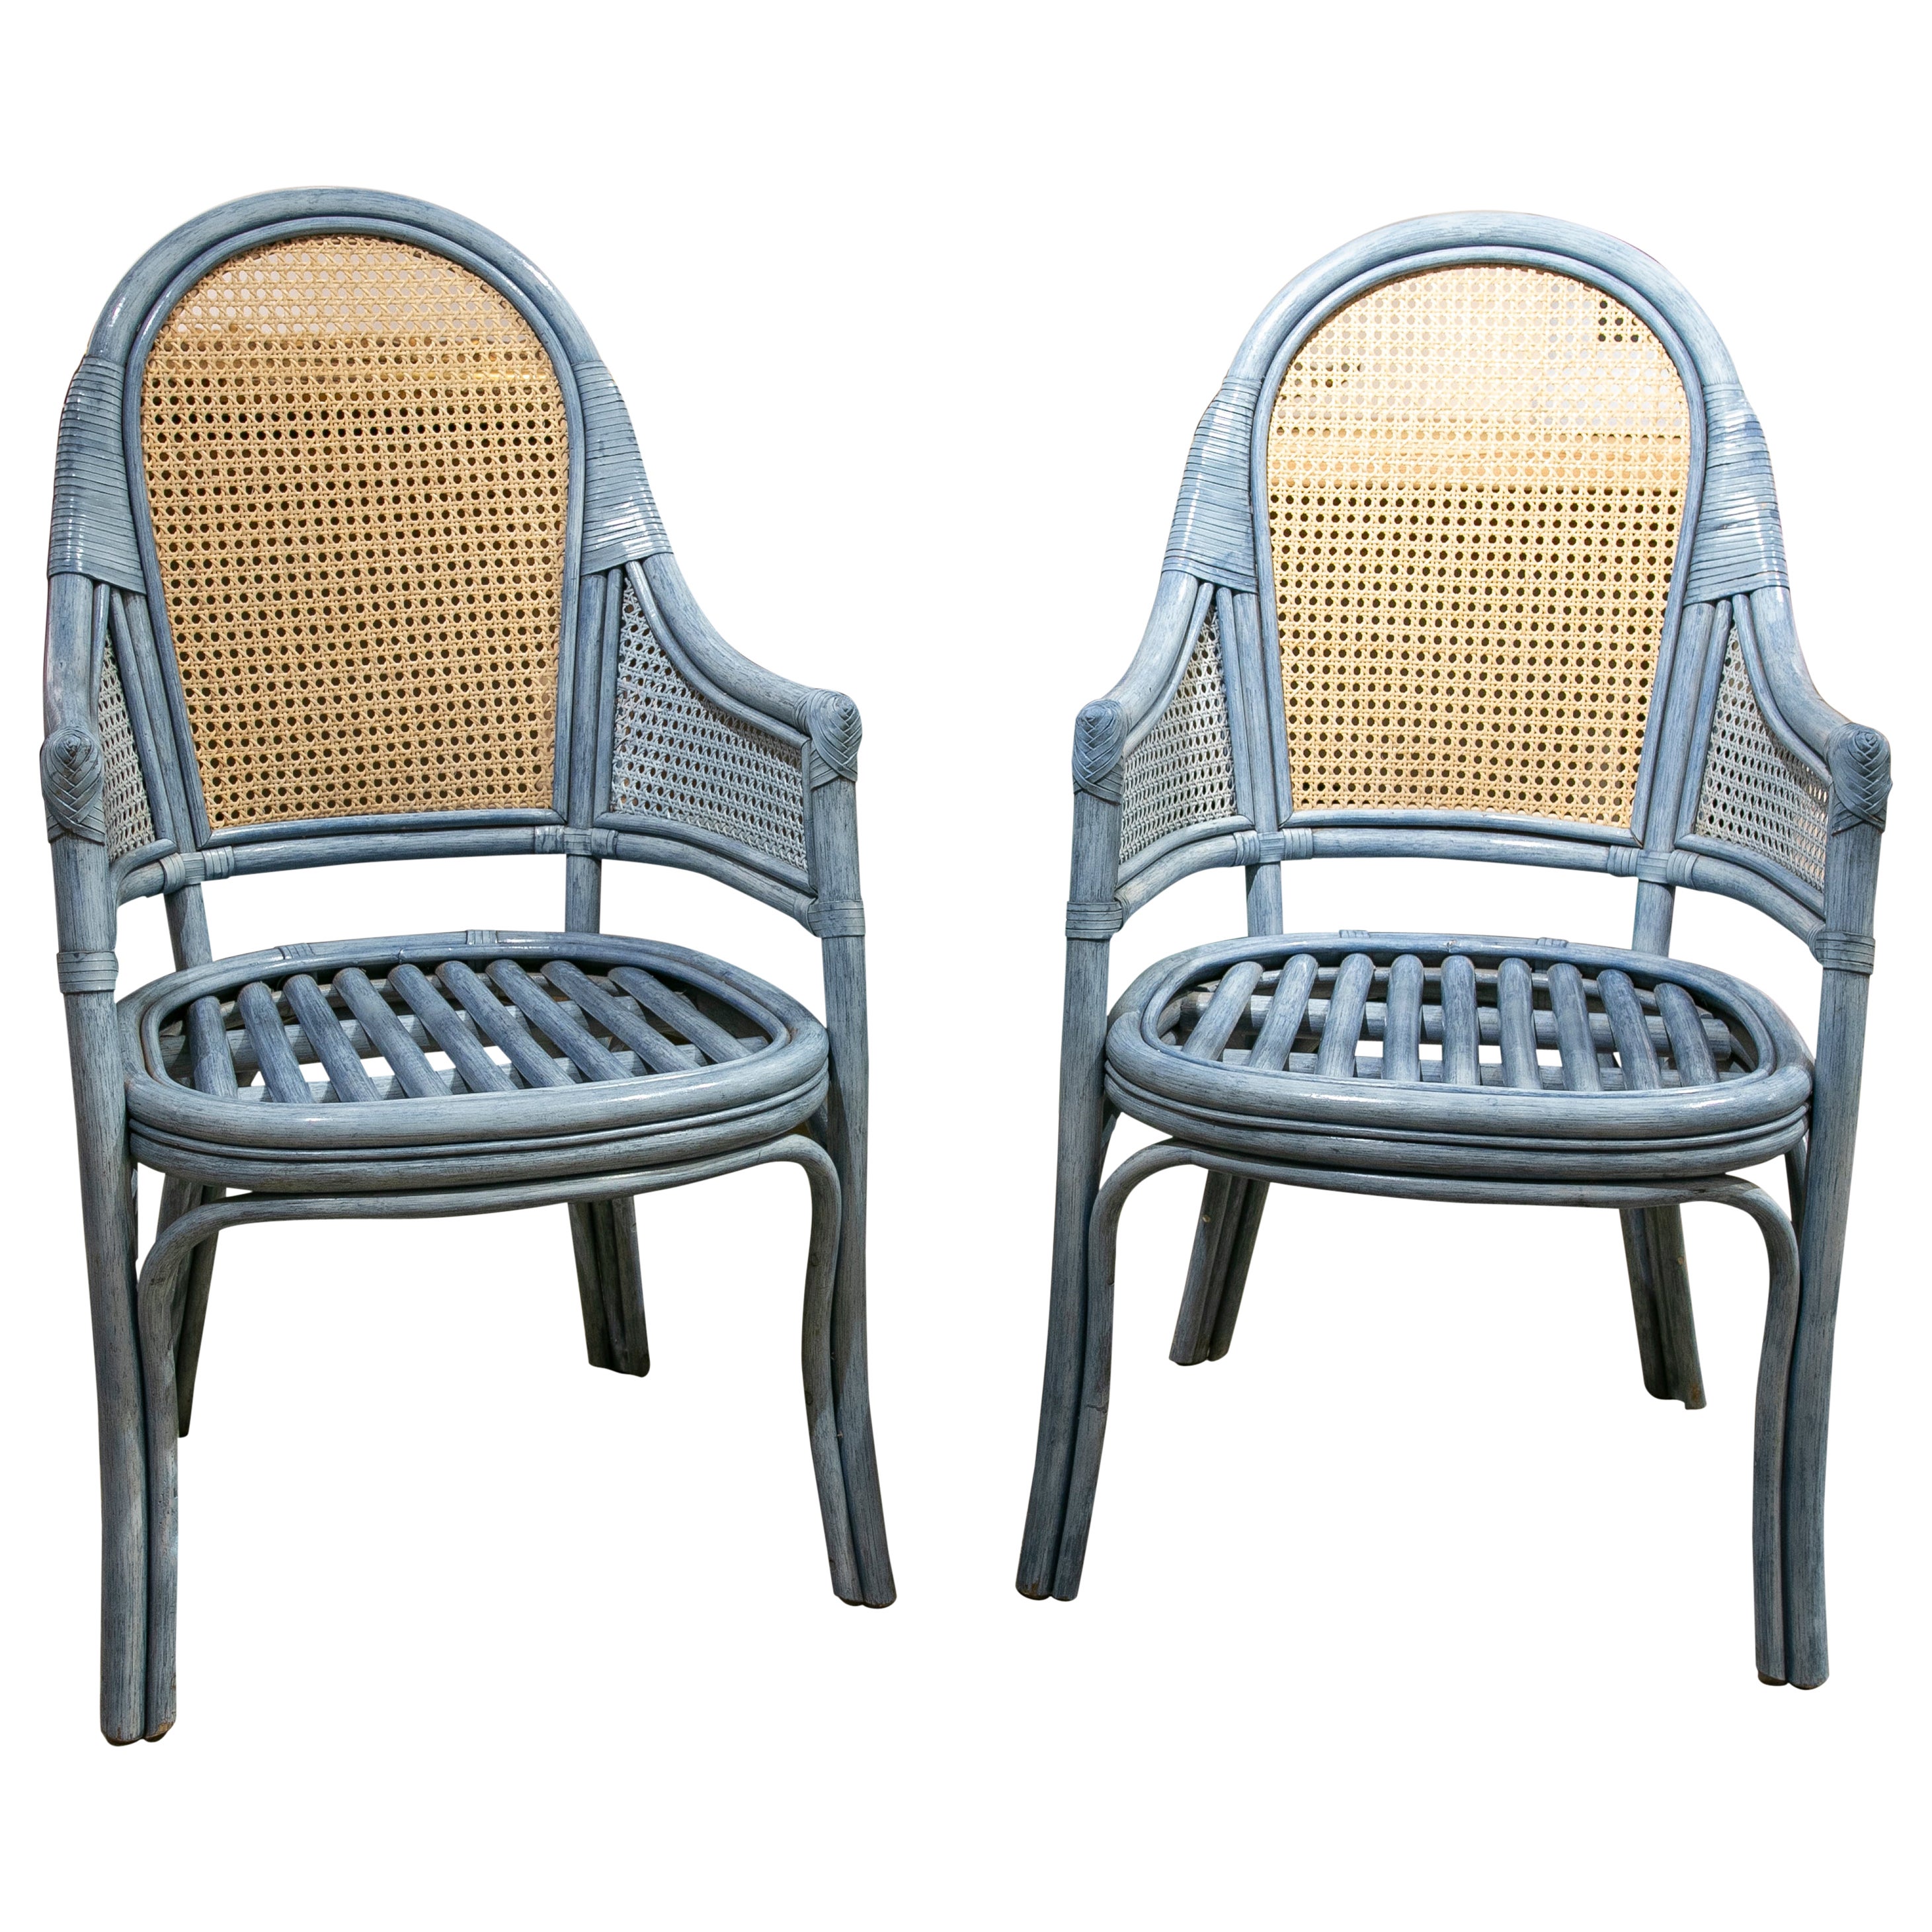 1980s Pair of Armchairs Made in Rattan Grid and Bamboo